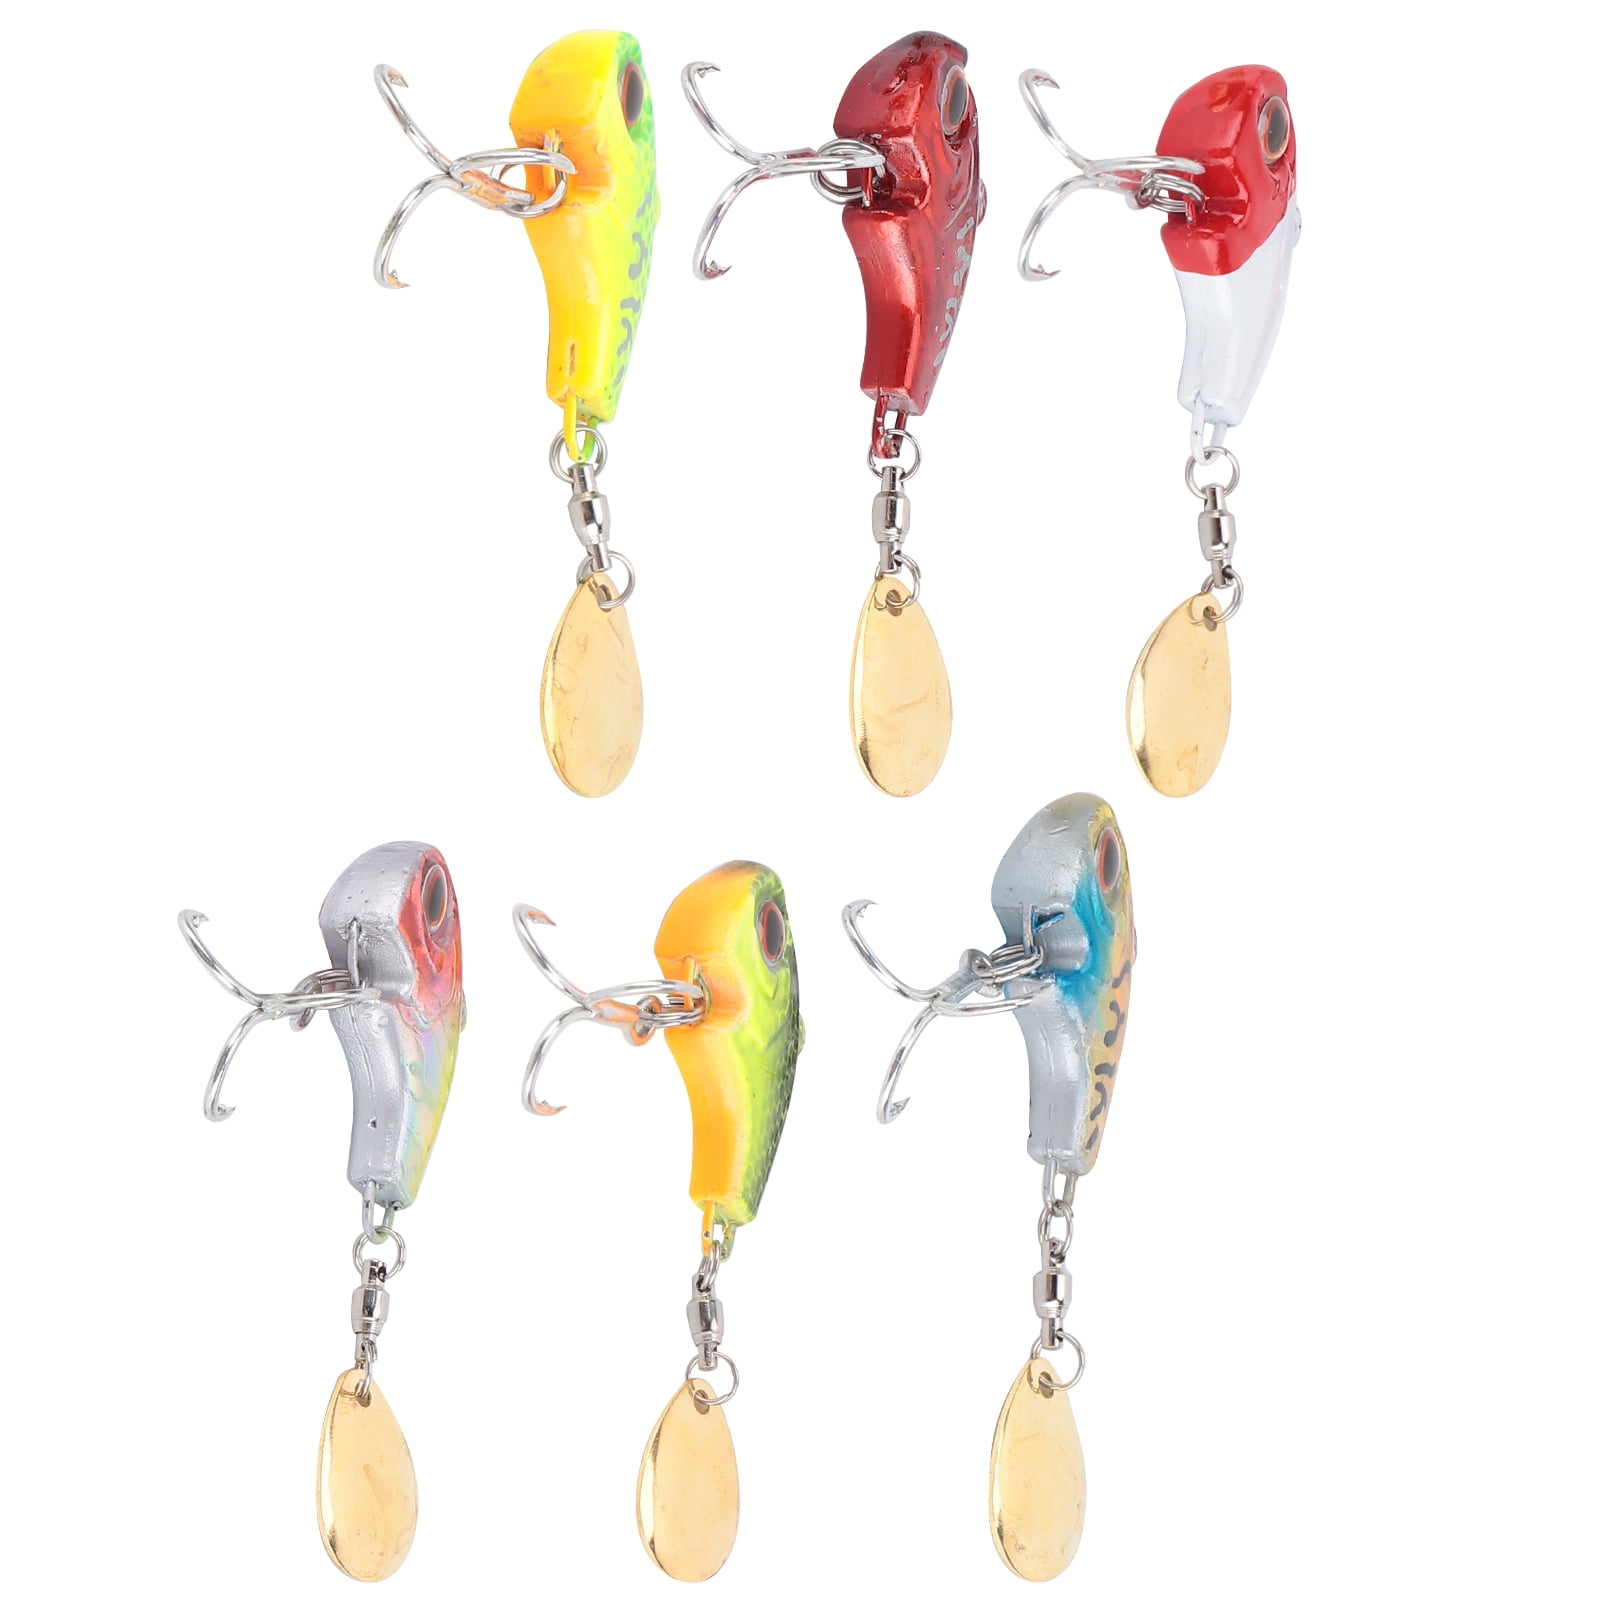 Crtynell Spoon Trout Fishing Lure, Best Throwing Distance. Lifelike More Efficient To Attract Fish. Spoon  For Bait Vibration Sinking Bait Jigging Fishing